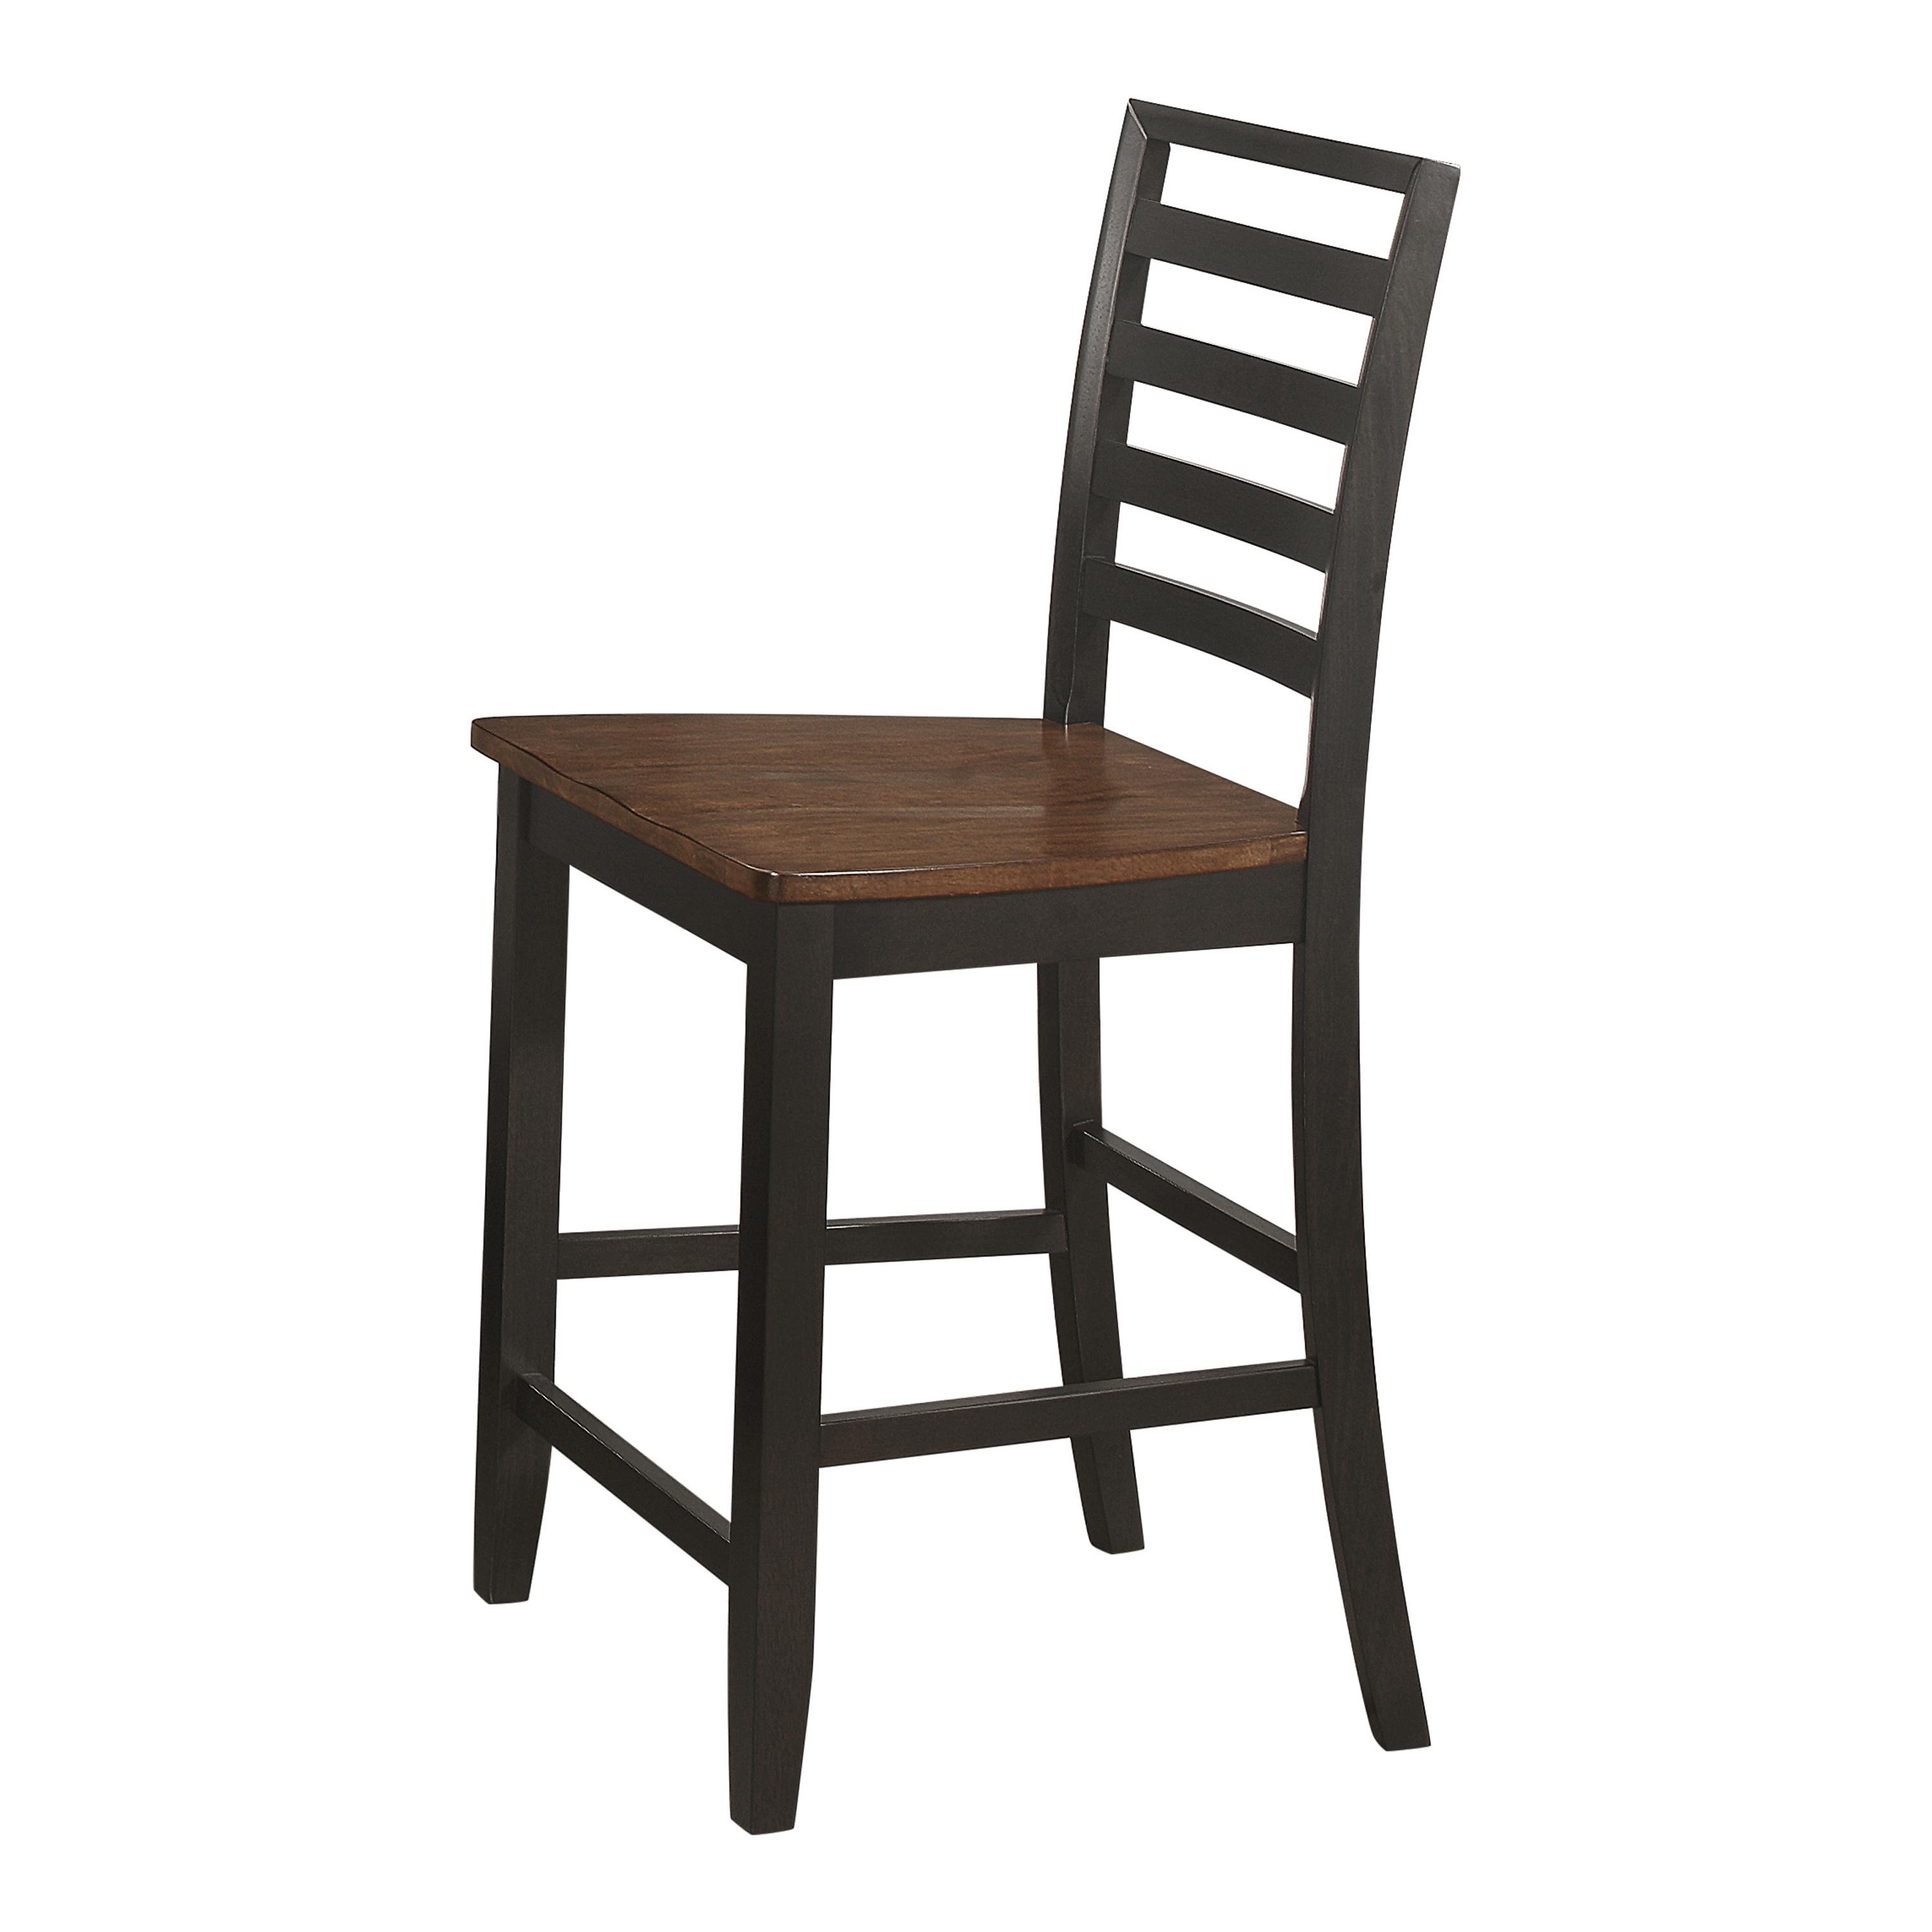 Rustic Counter Height Stool Set 192729 Sanford 192729 in Espresso 